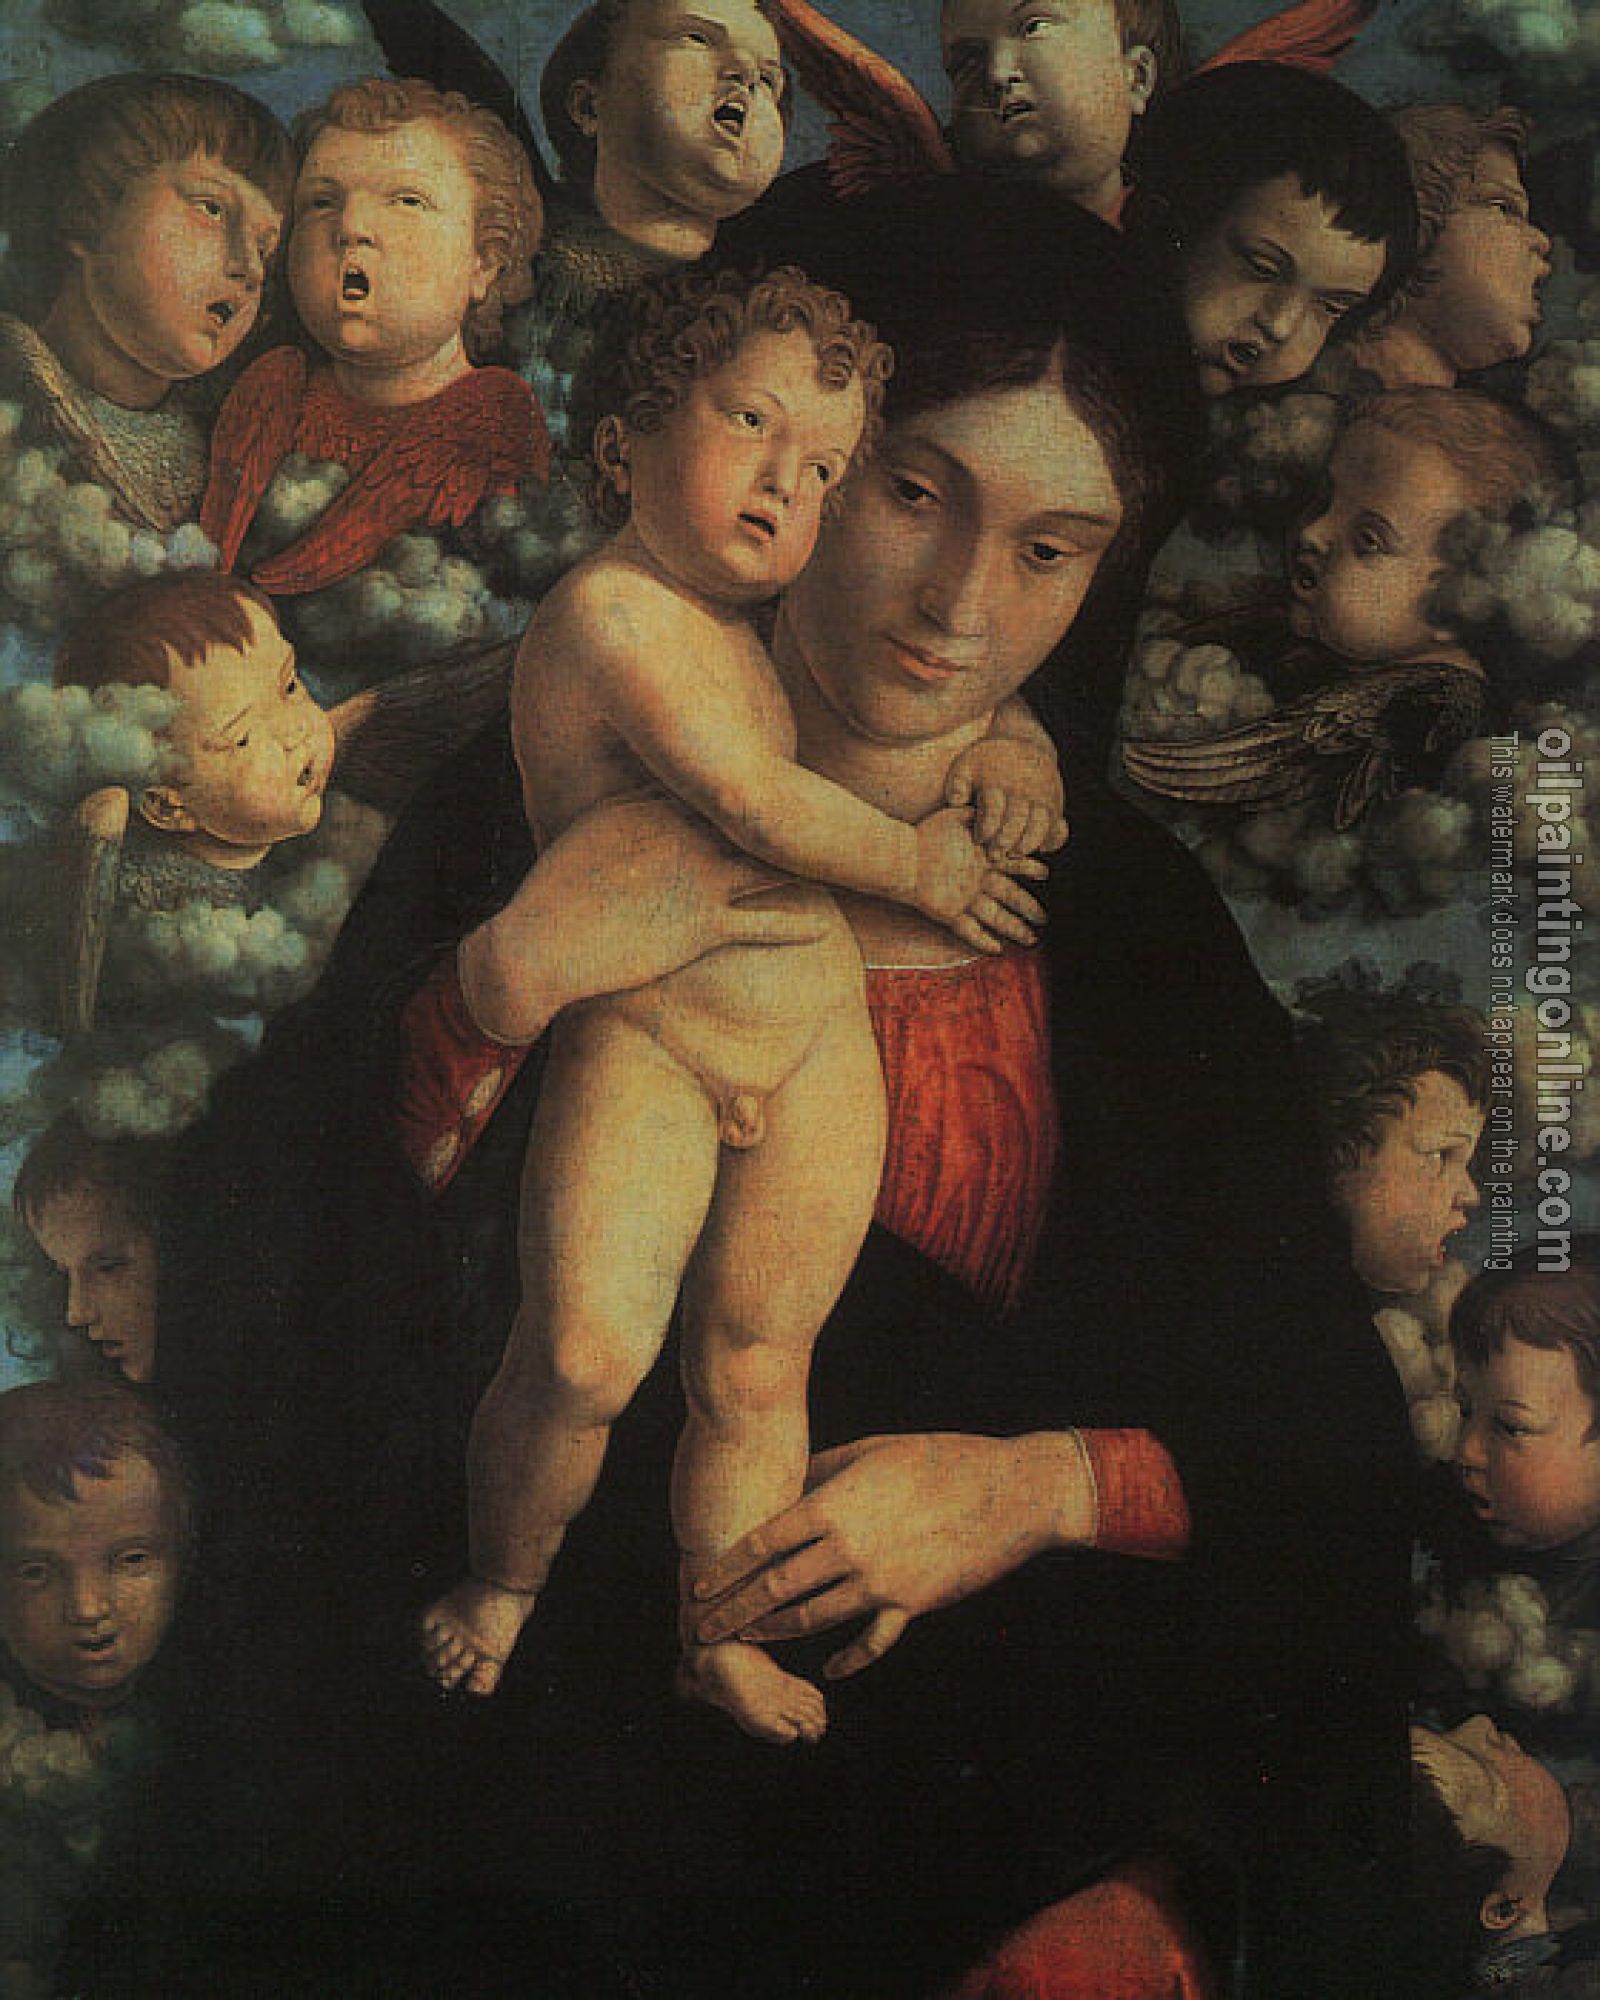 Mantegna, Andrea - Madonna and Child with Cherubs